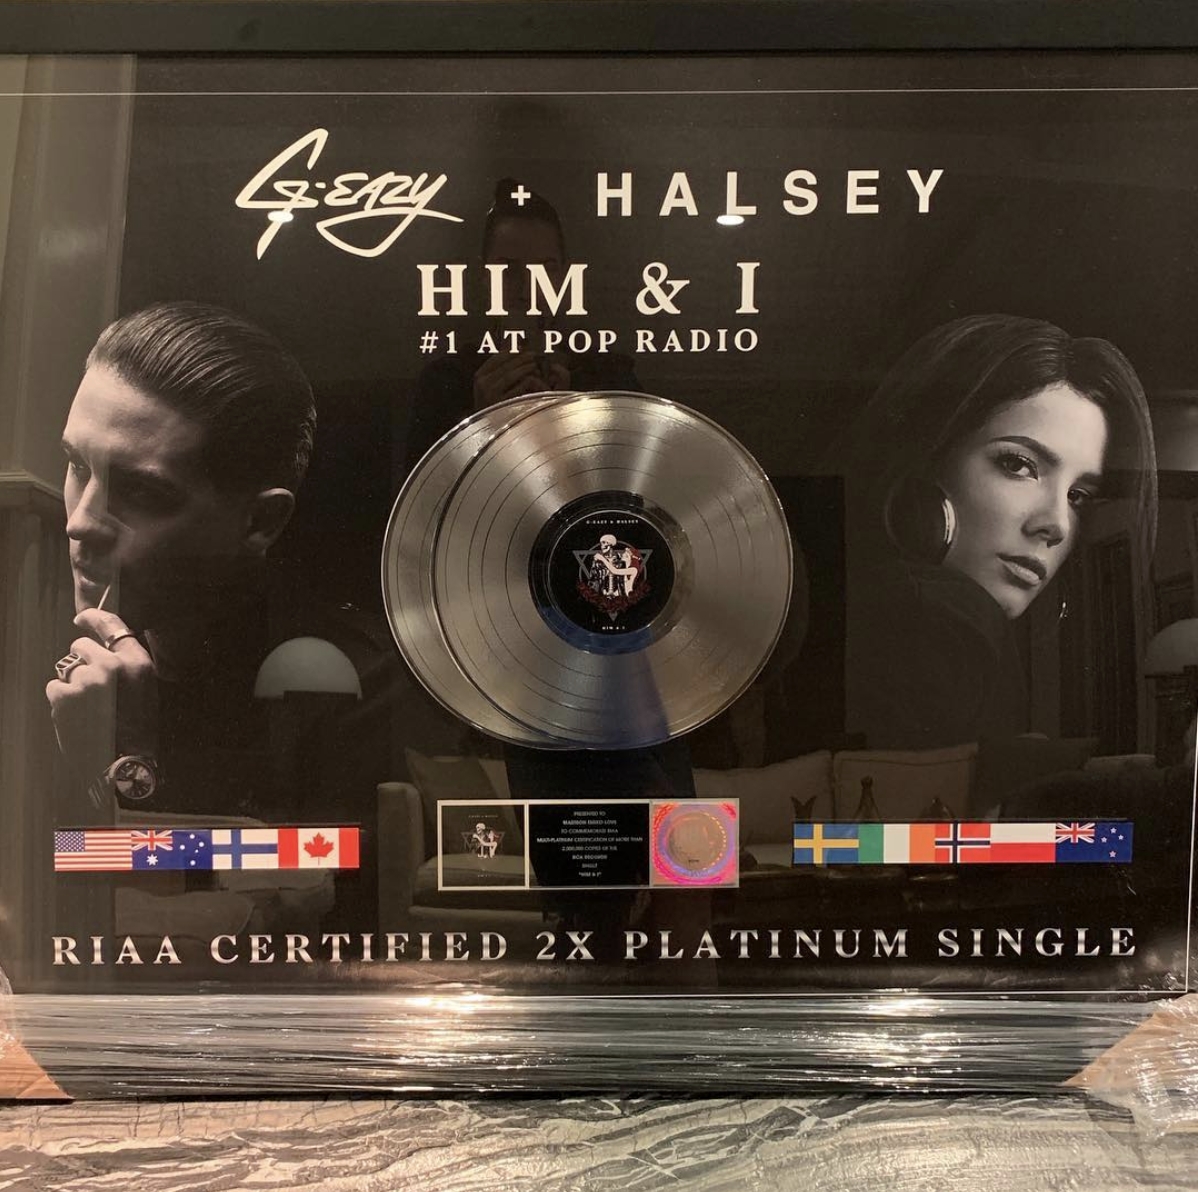 Madison love and her platinum certification